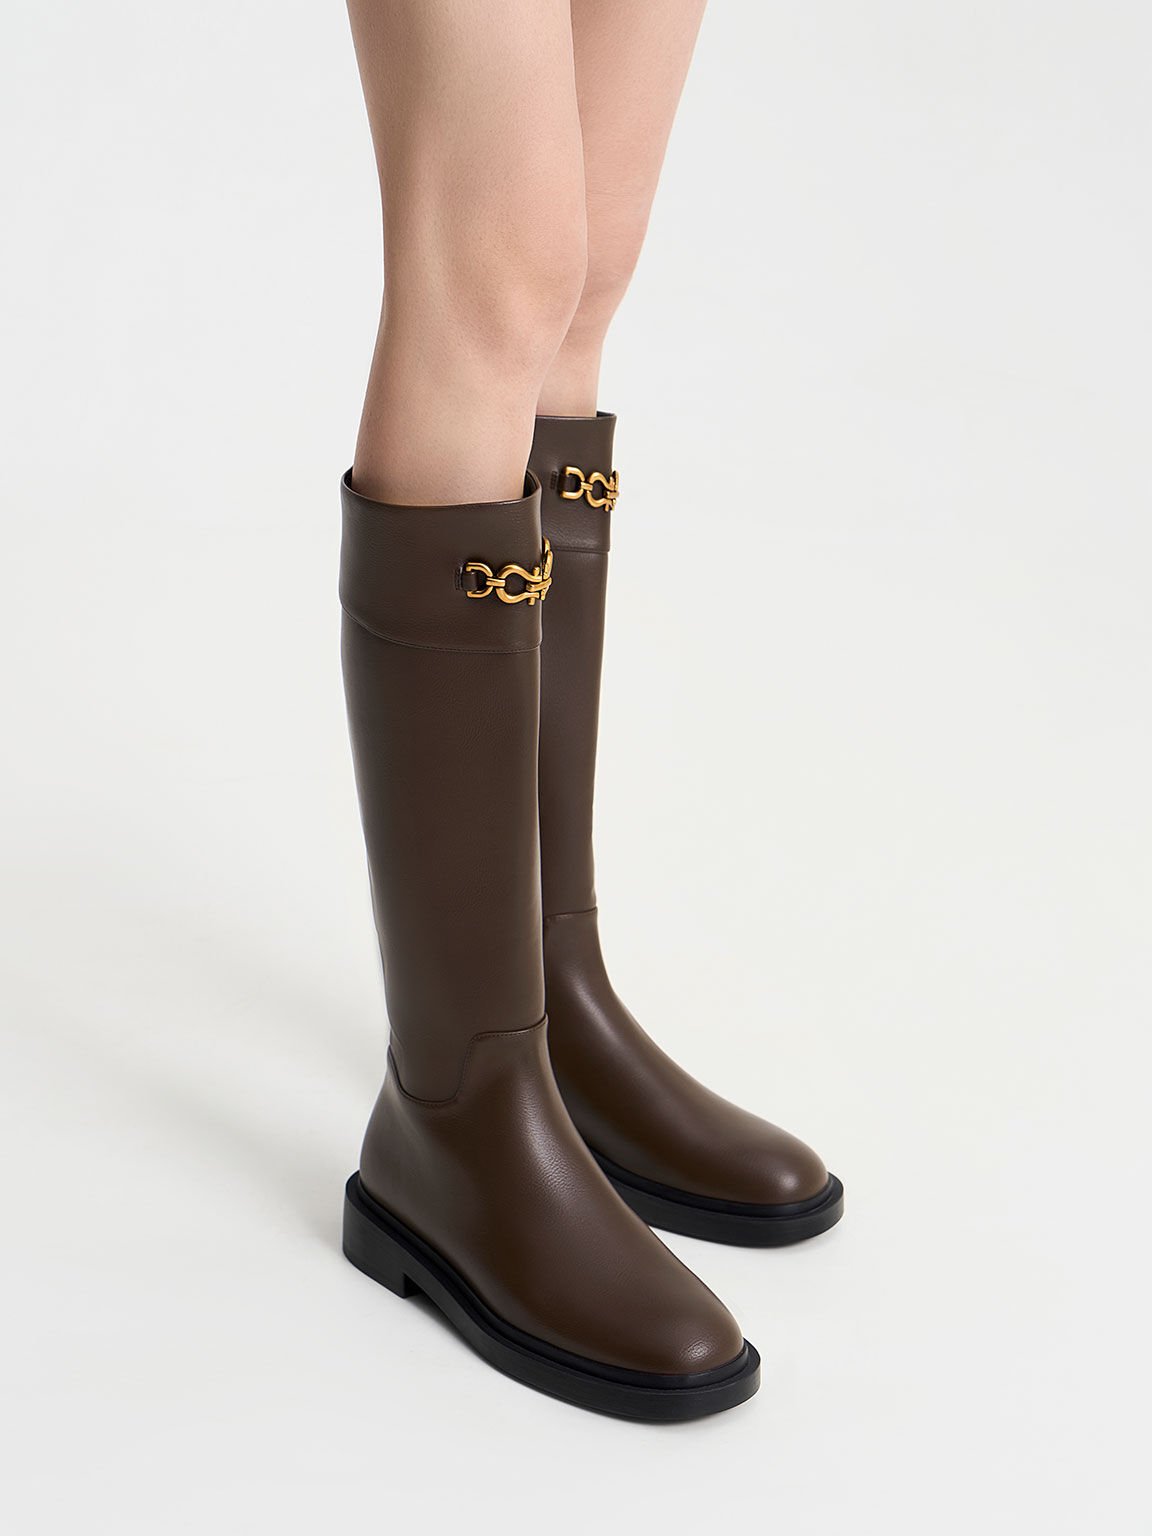 Decker leather knee-high boots